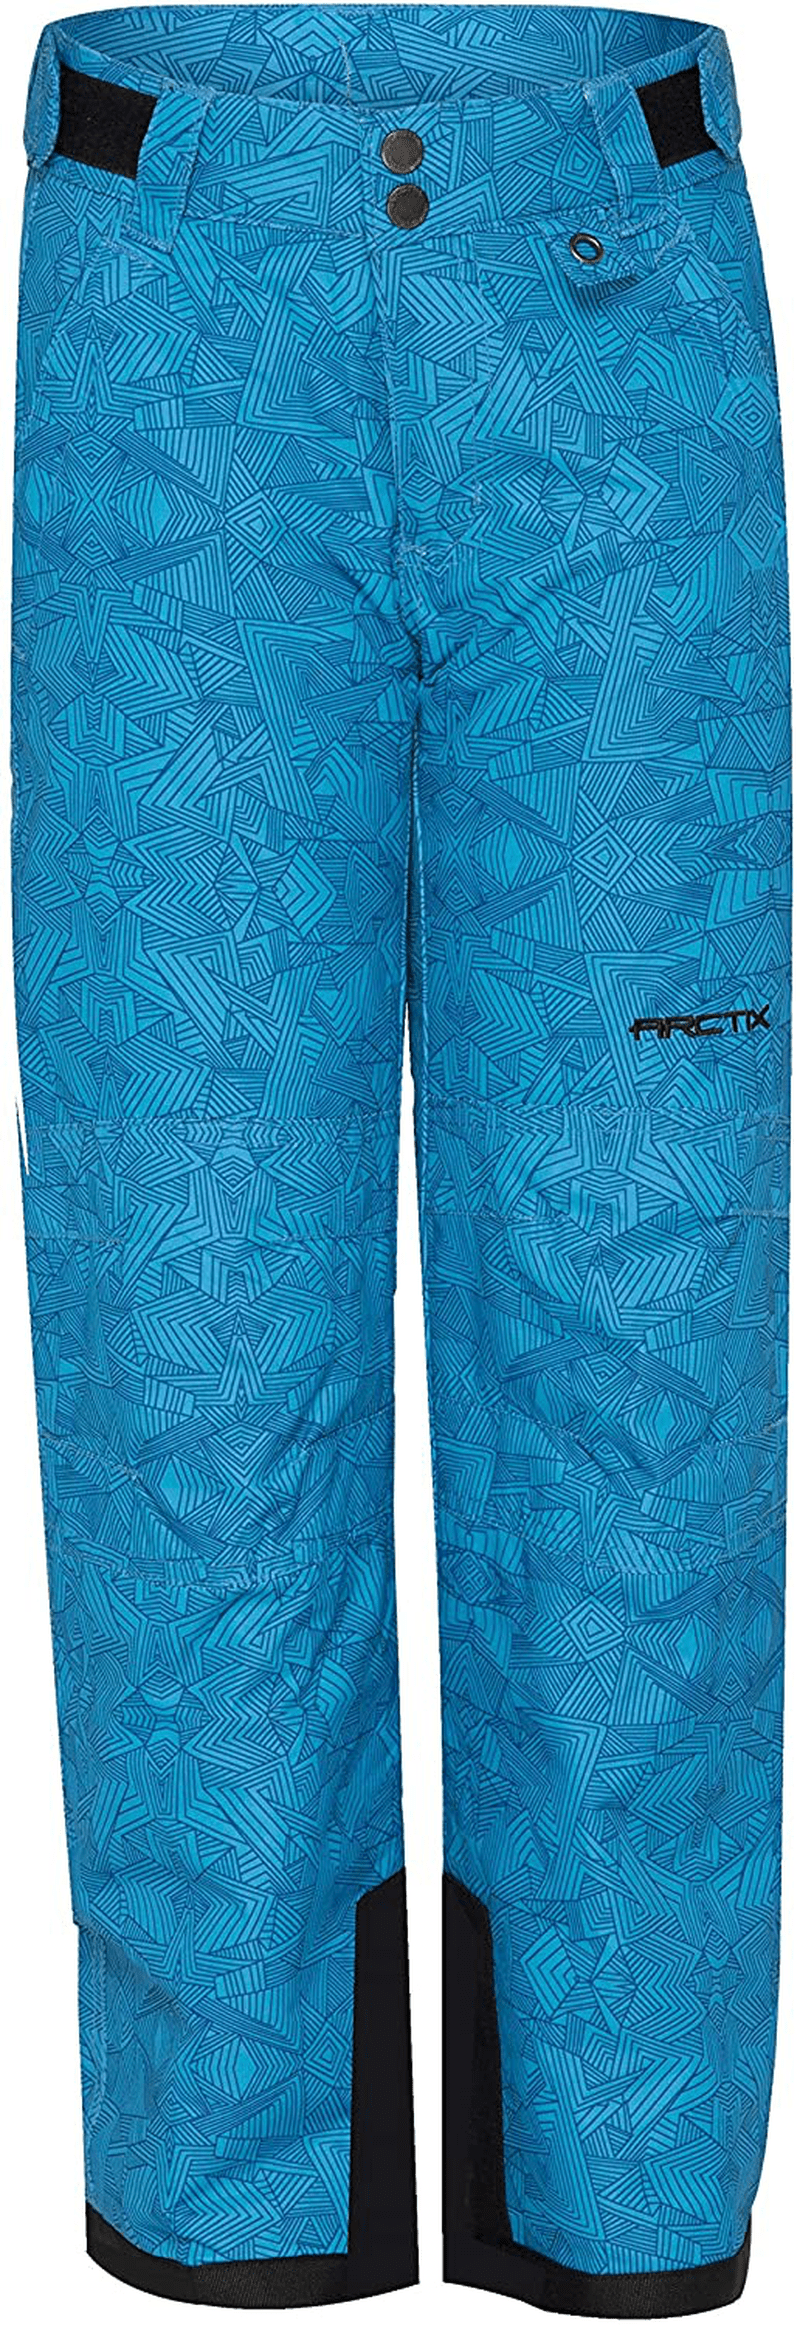 Arctix Kids Snow Pants with Reinforced Knees and Seat